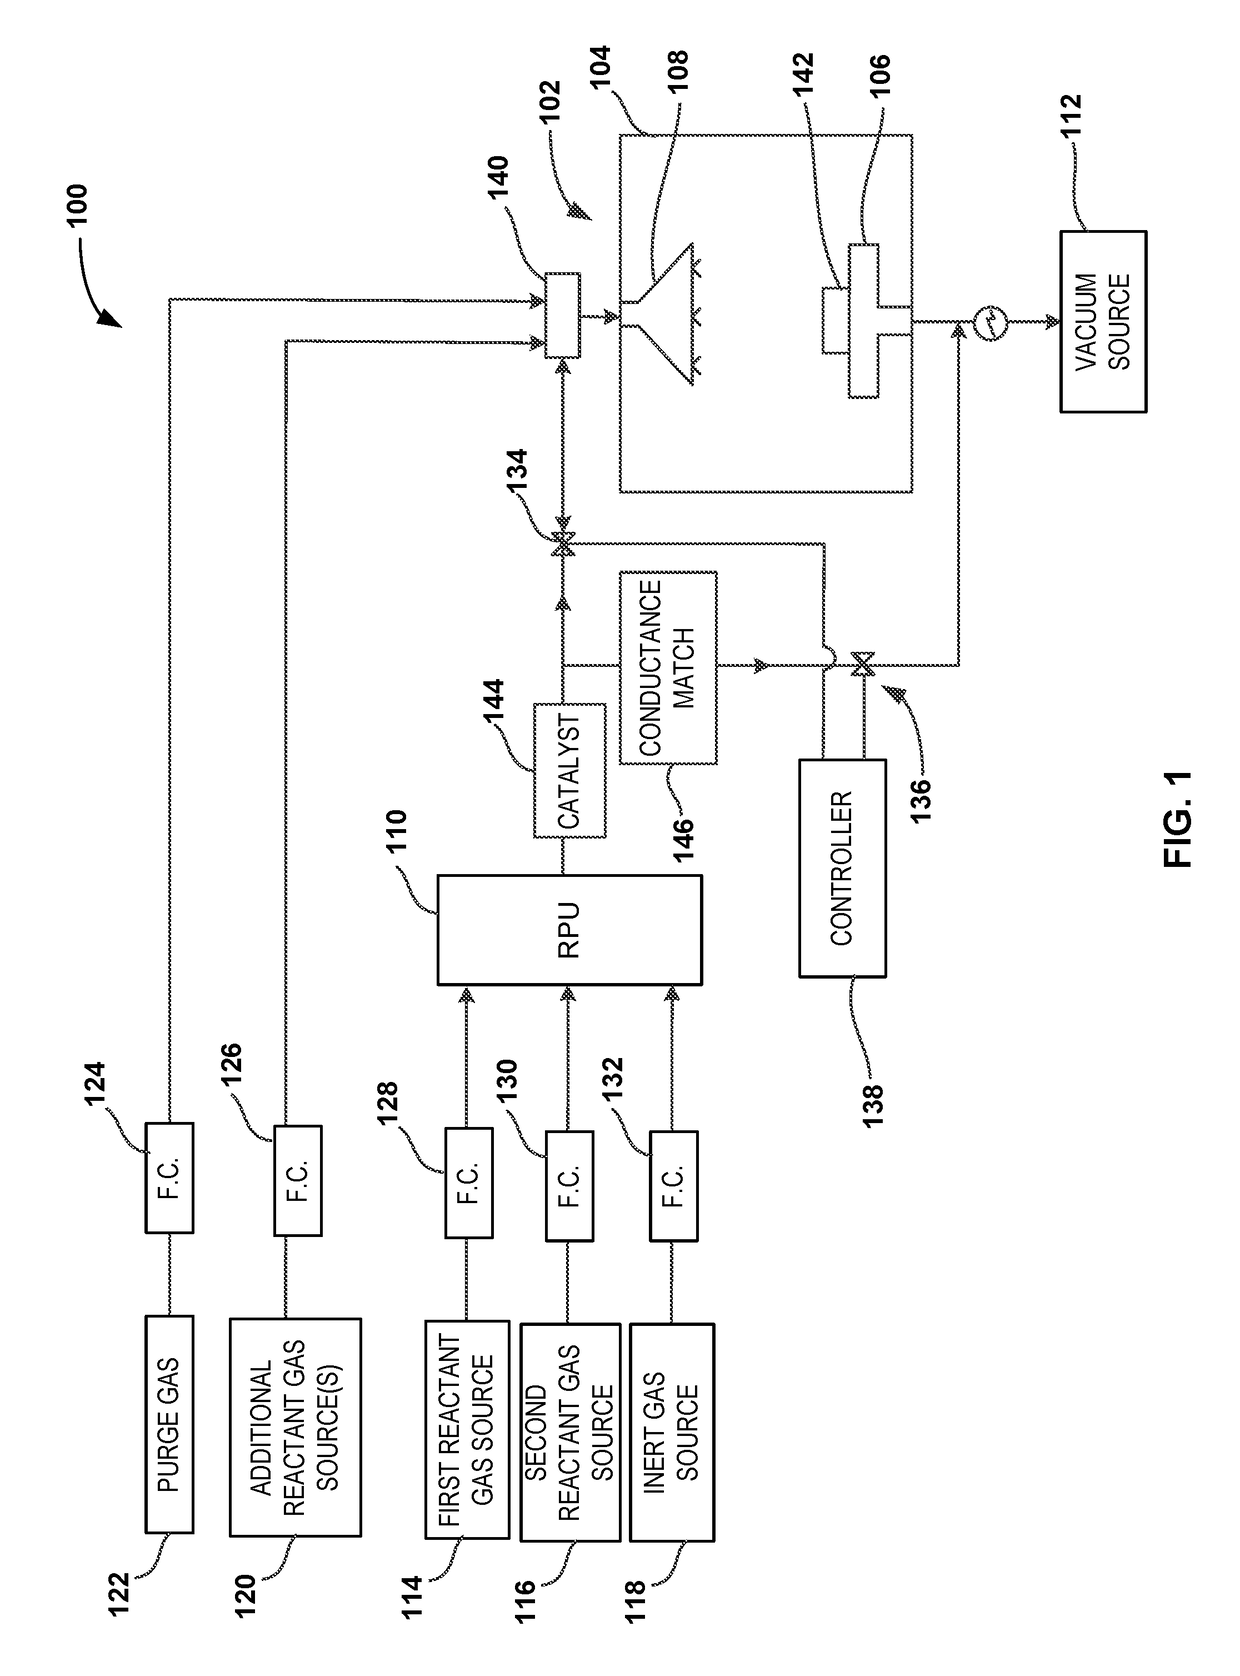 Method and system for in-situ formation of intermediate reactive species